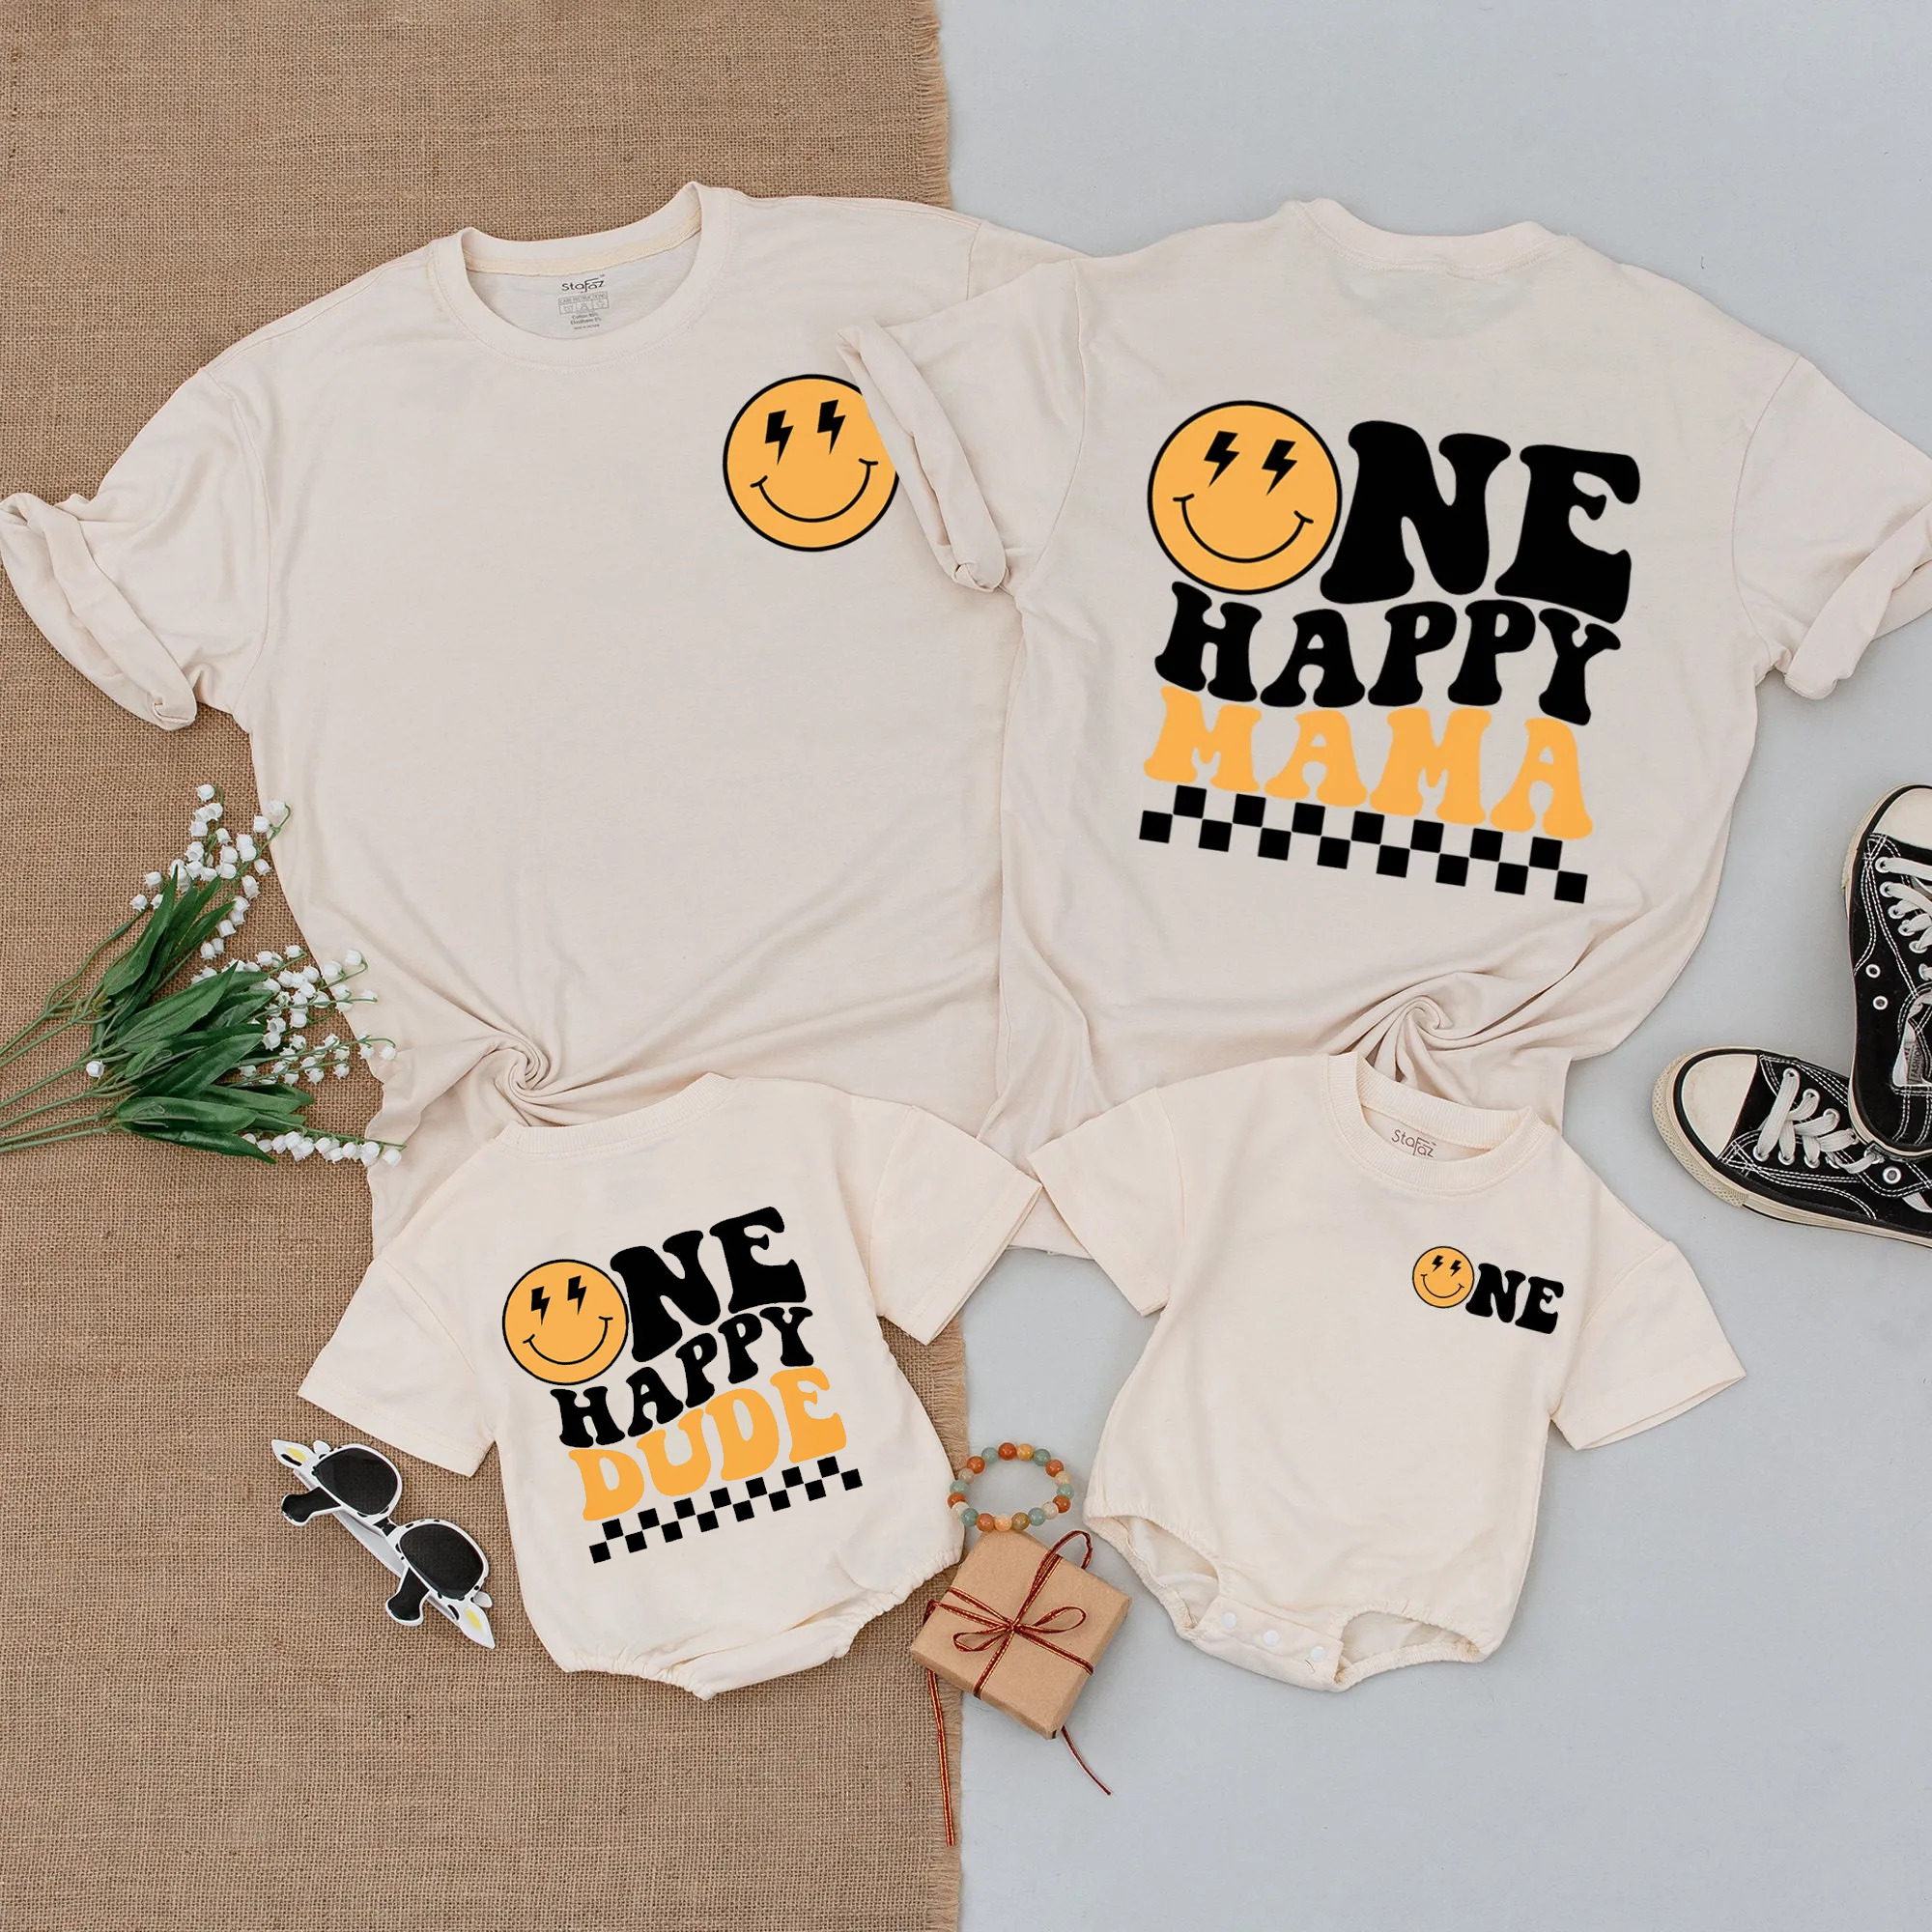 One Happy Dude Baby Romper Matching T-Shirt: Custom 1st Birthday Outfit!